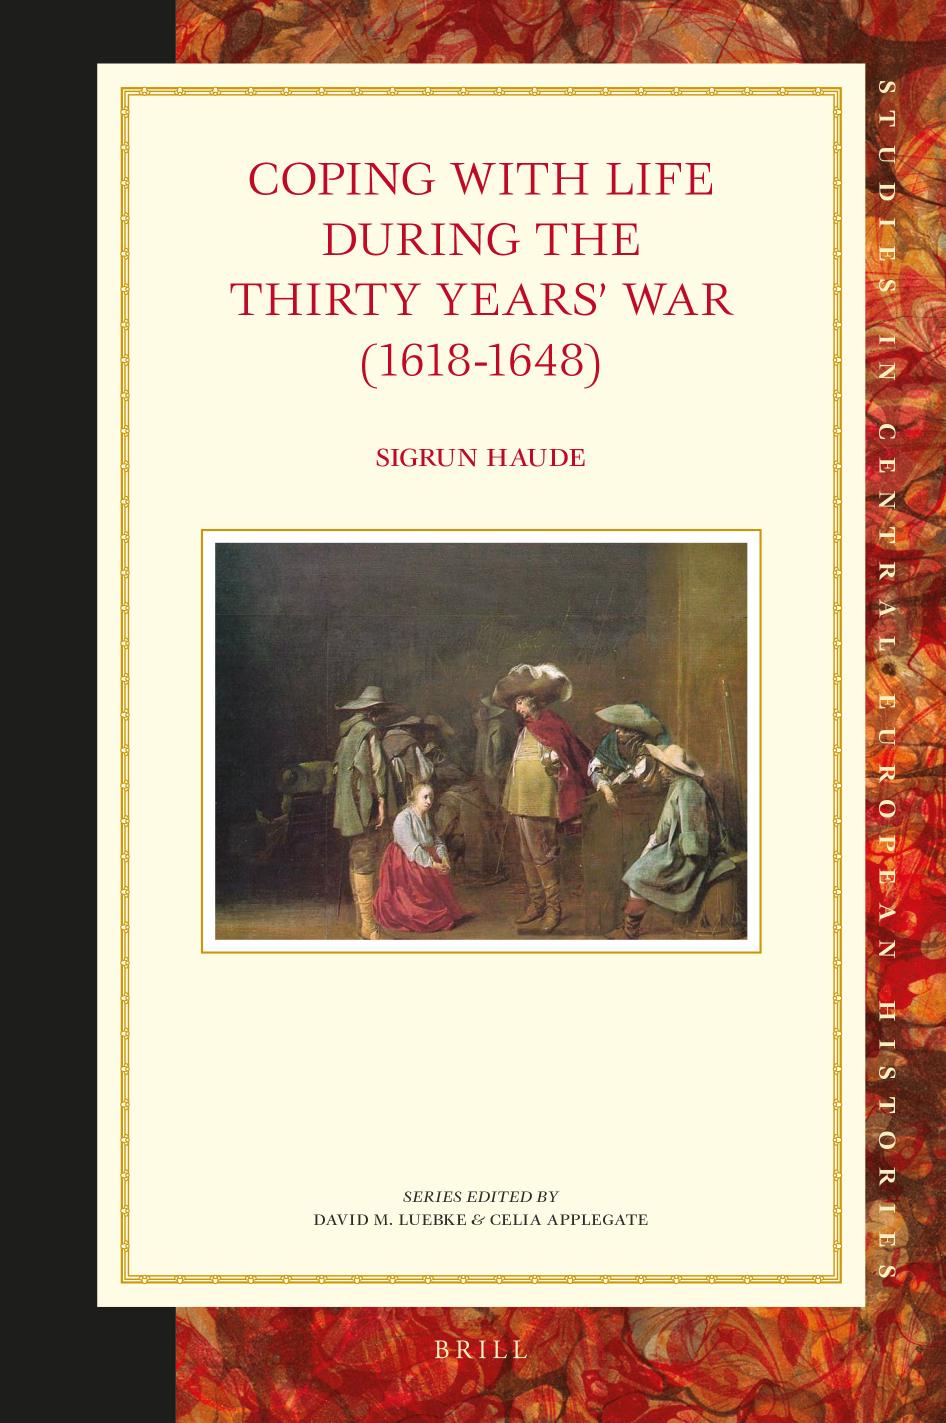 Coping with Life During the Thirty Years' War (1618-1648) by Sigrun Haude;